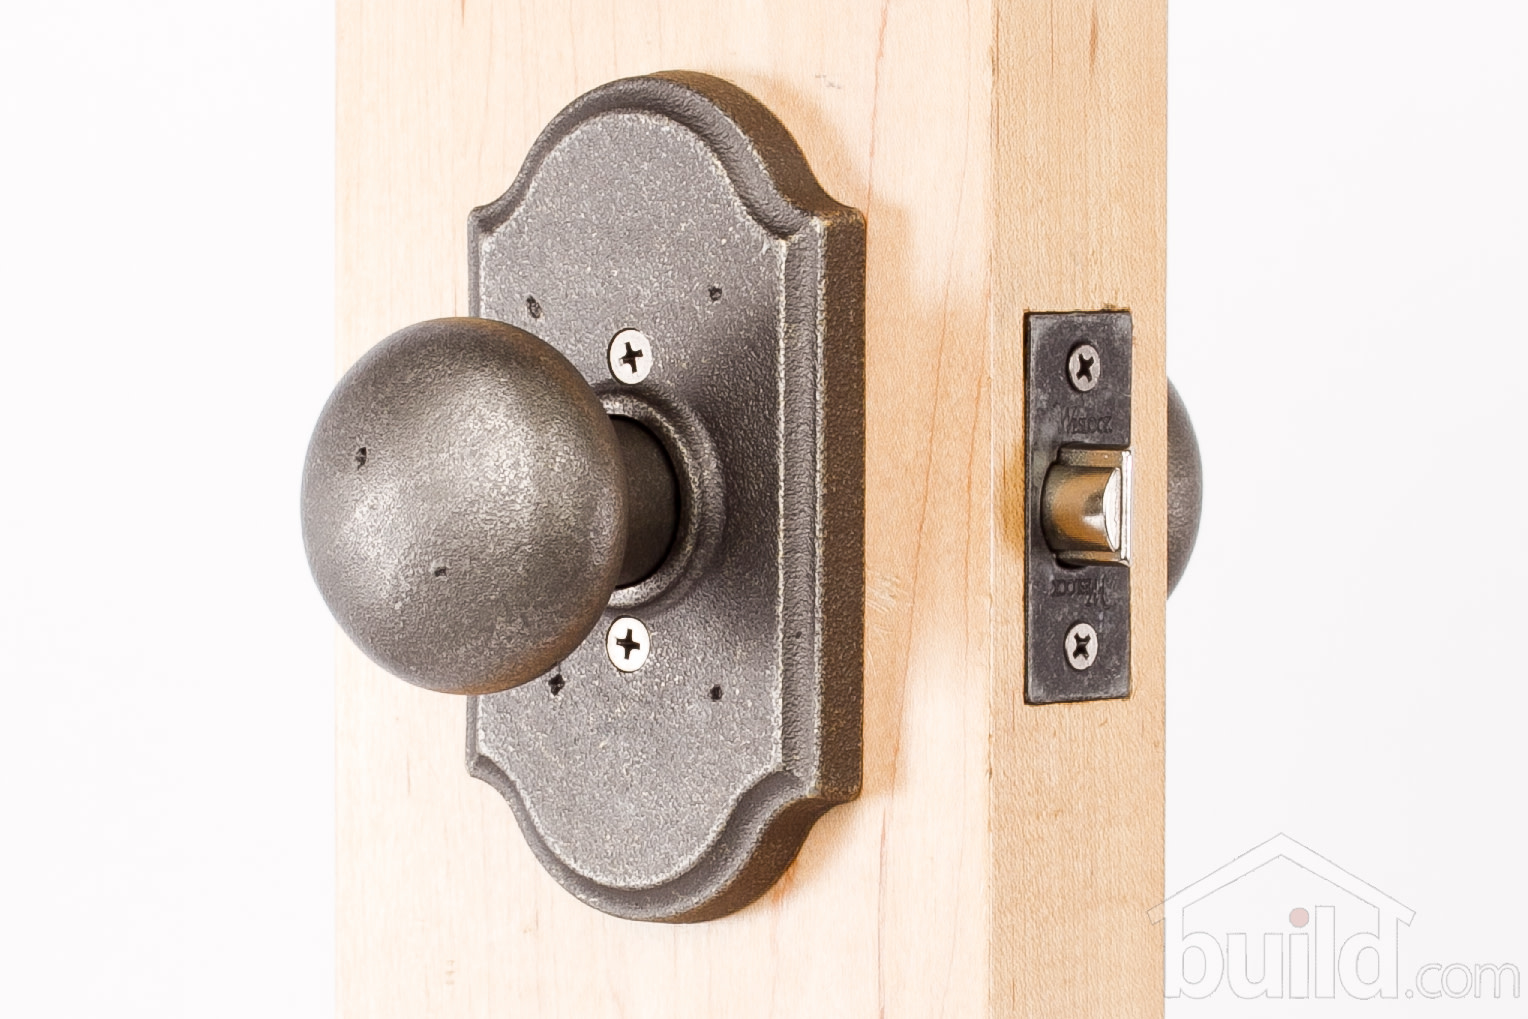 Weslock 07140F1F1SL23 Wexford Premiere Entry Lock with Adjustable Latch and Full Lip Strike Oil Rubbed Bronze Finish - image 5 of 7